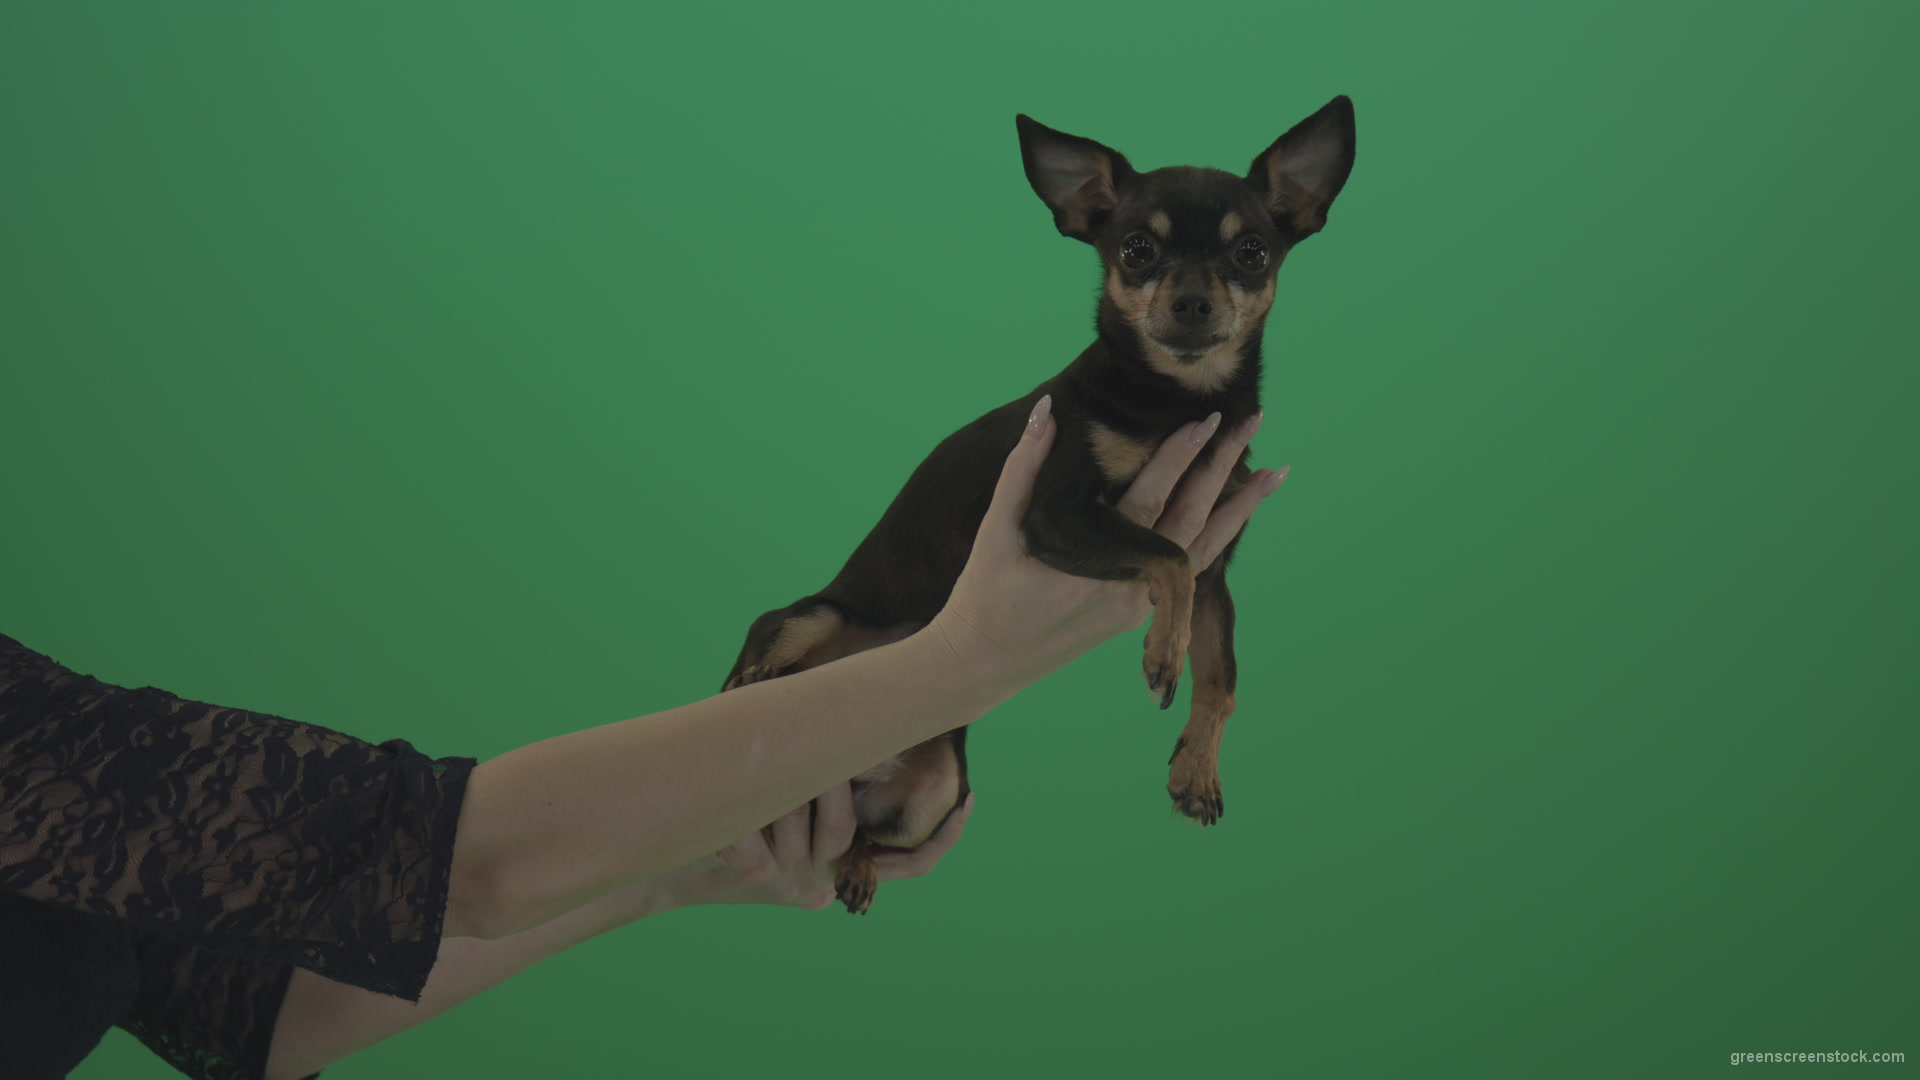 Black-funny-Chihuahua-small-dog-in-female-hands-on-green-screen_006 Green Screen Stock